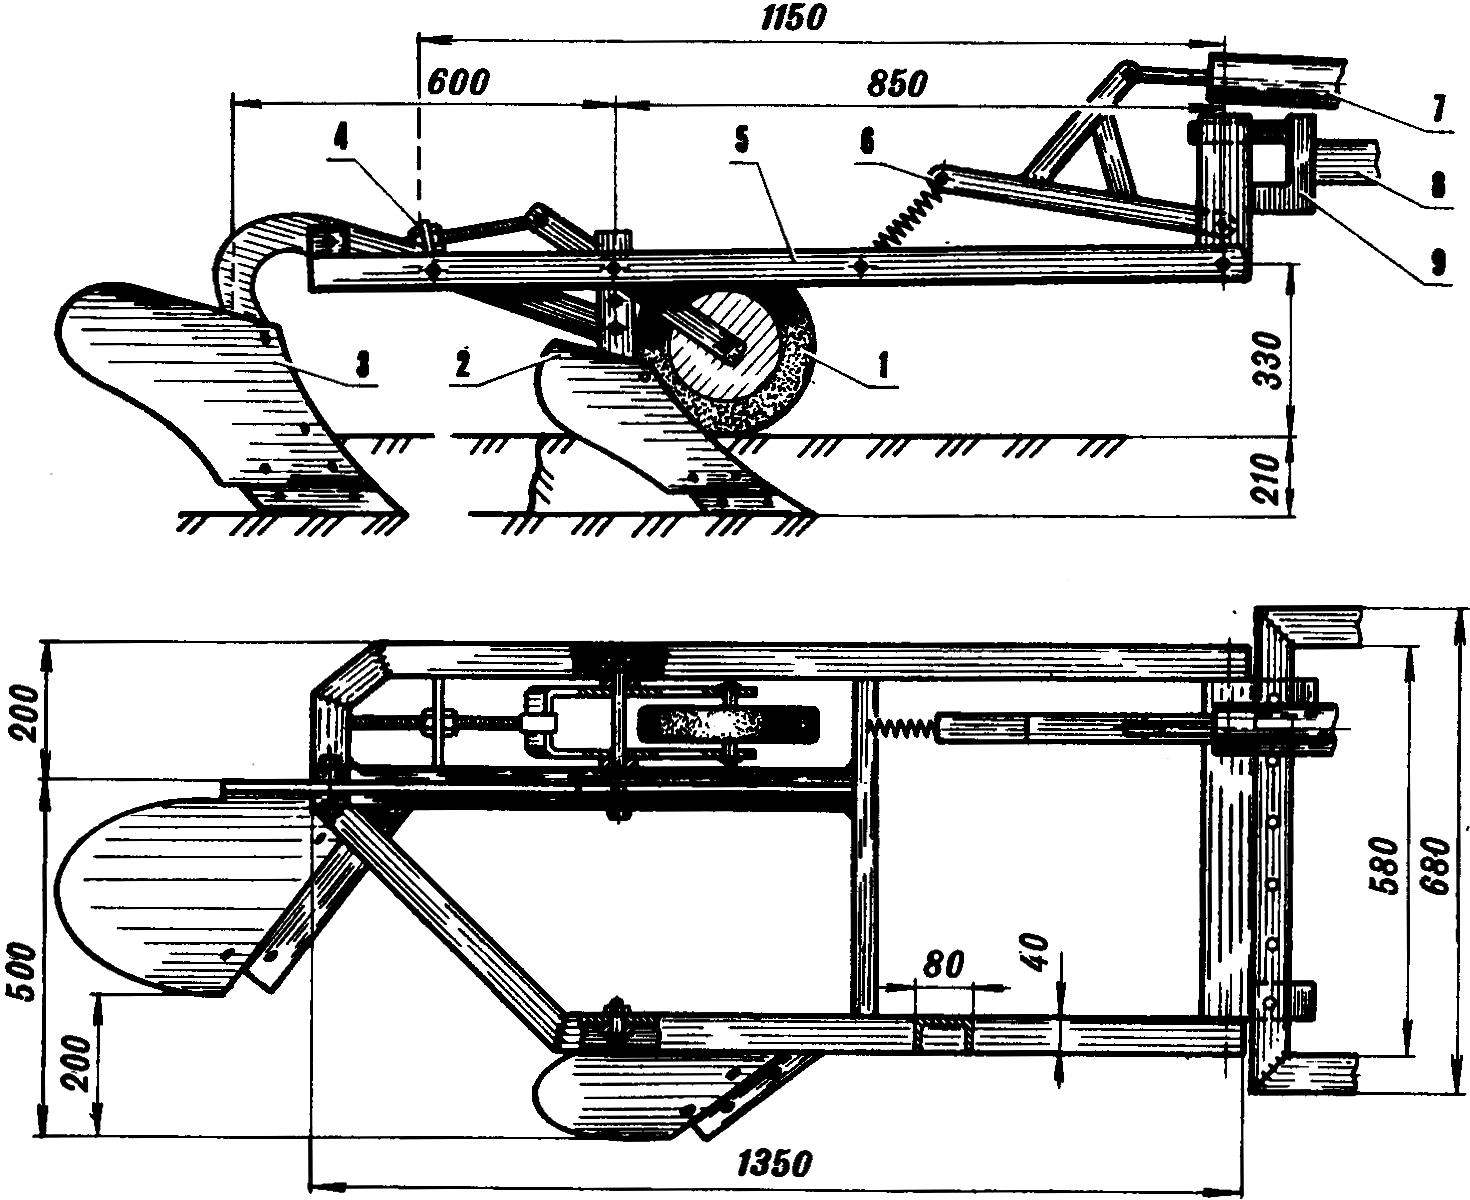 Frame plows with tillage implements and other items